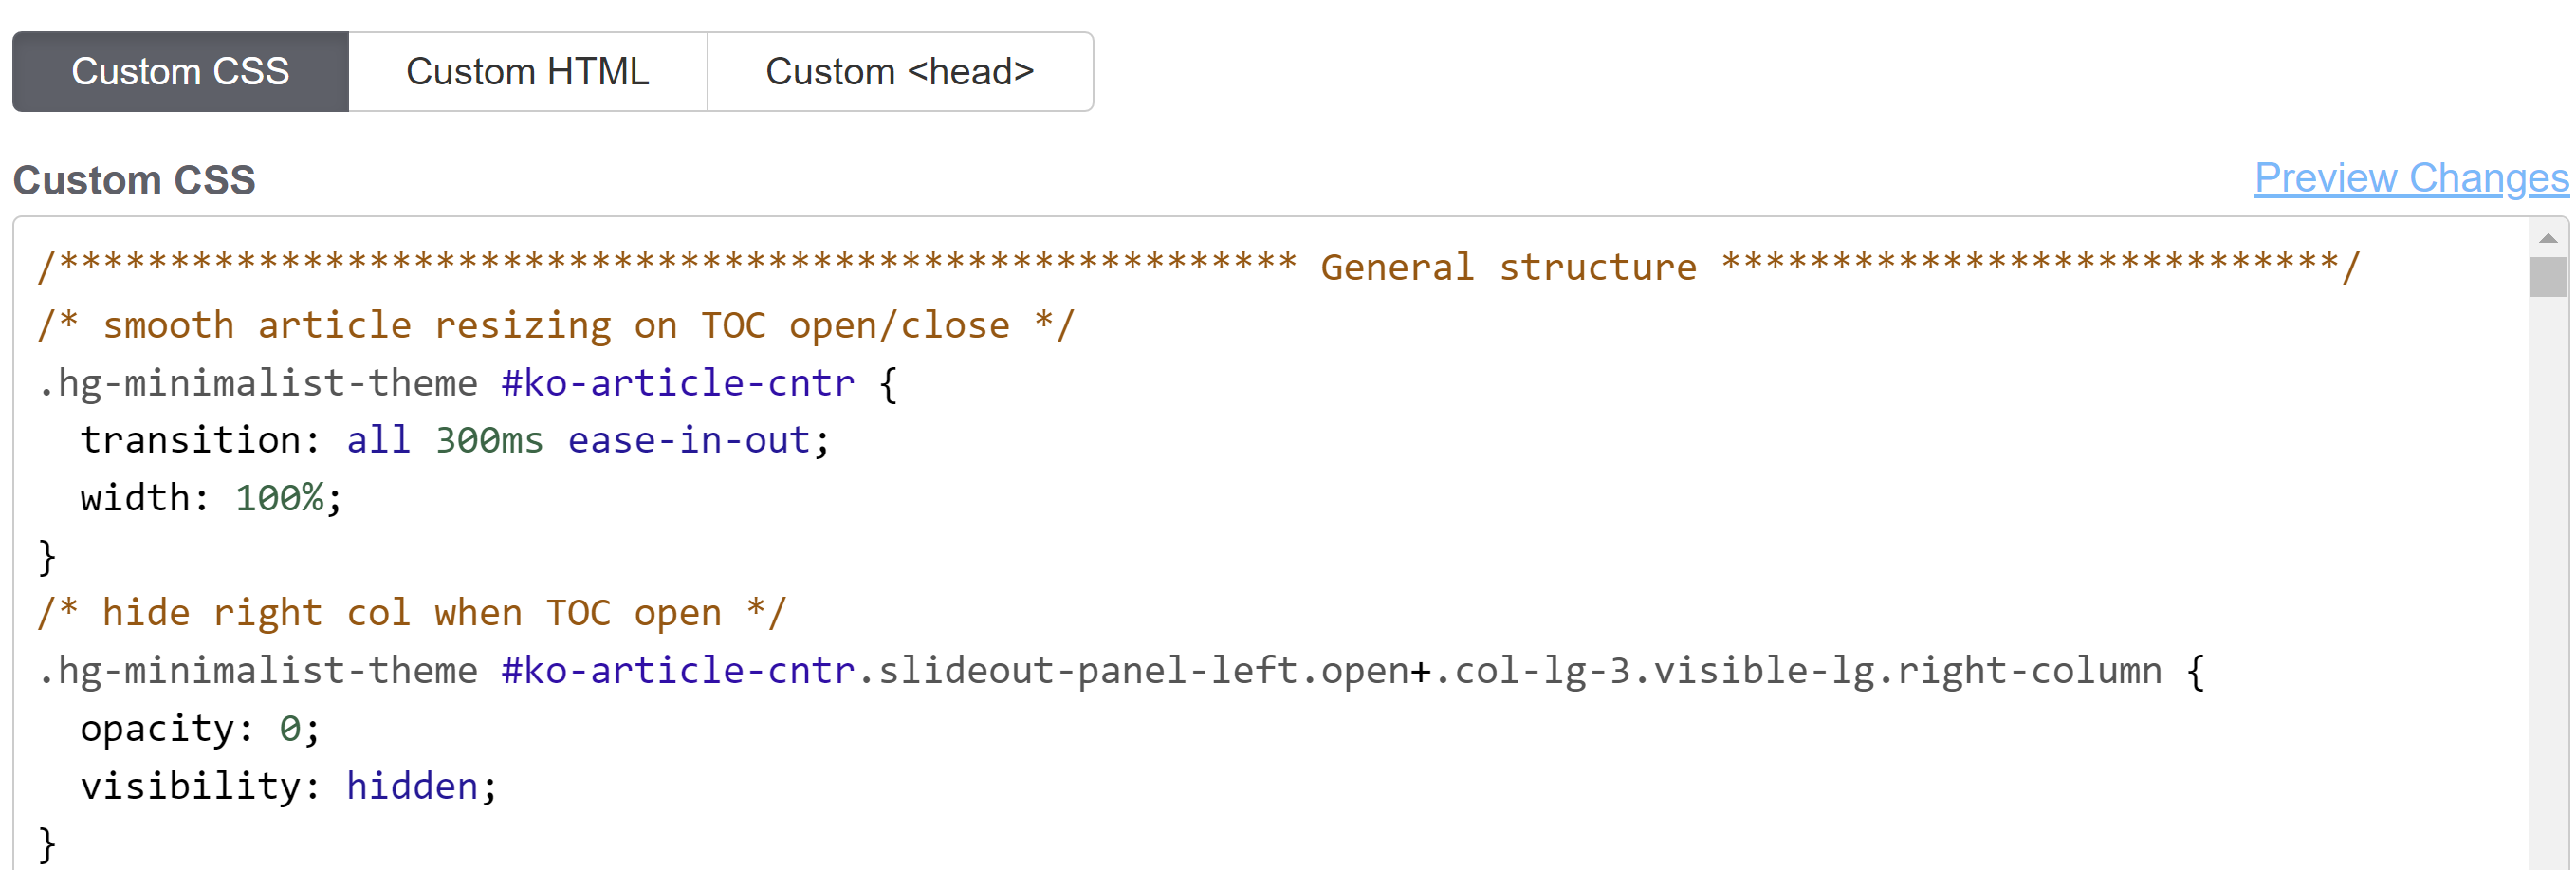 The Custom CSS section in Style Settings. The top of the section begins with a long comment around the text 